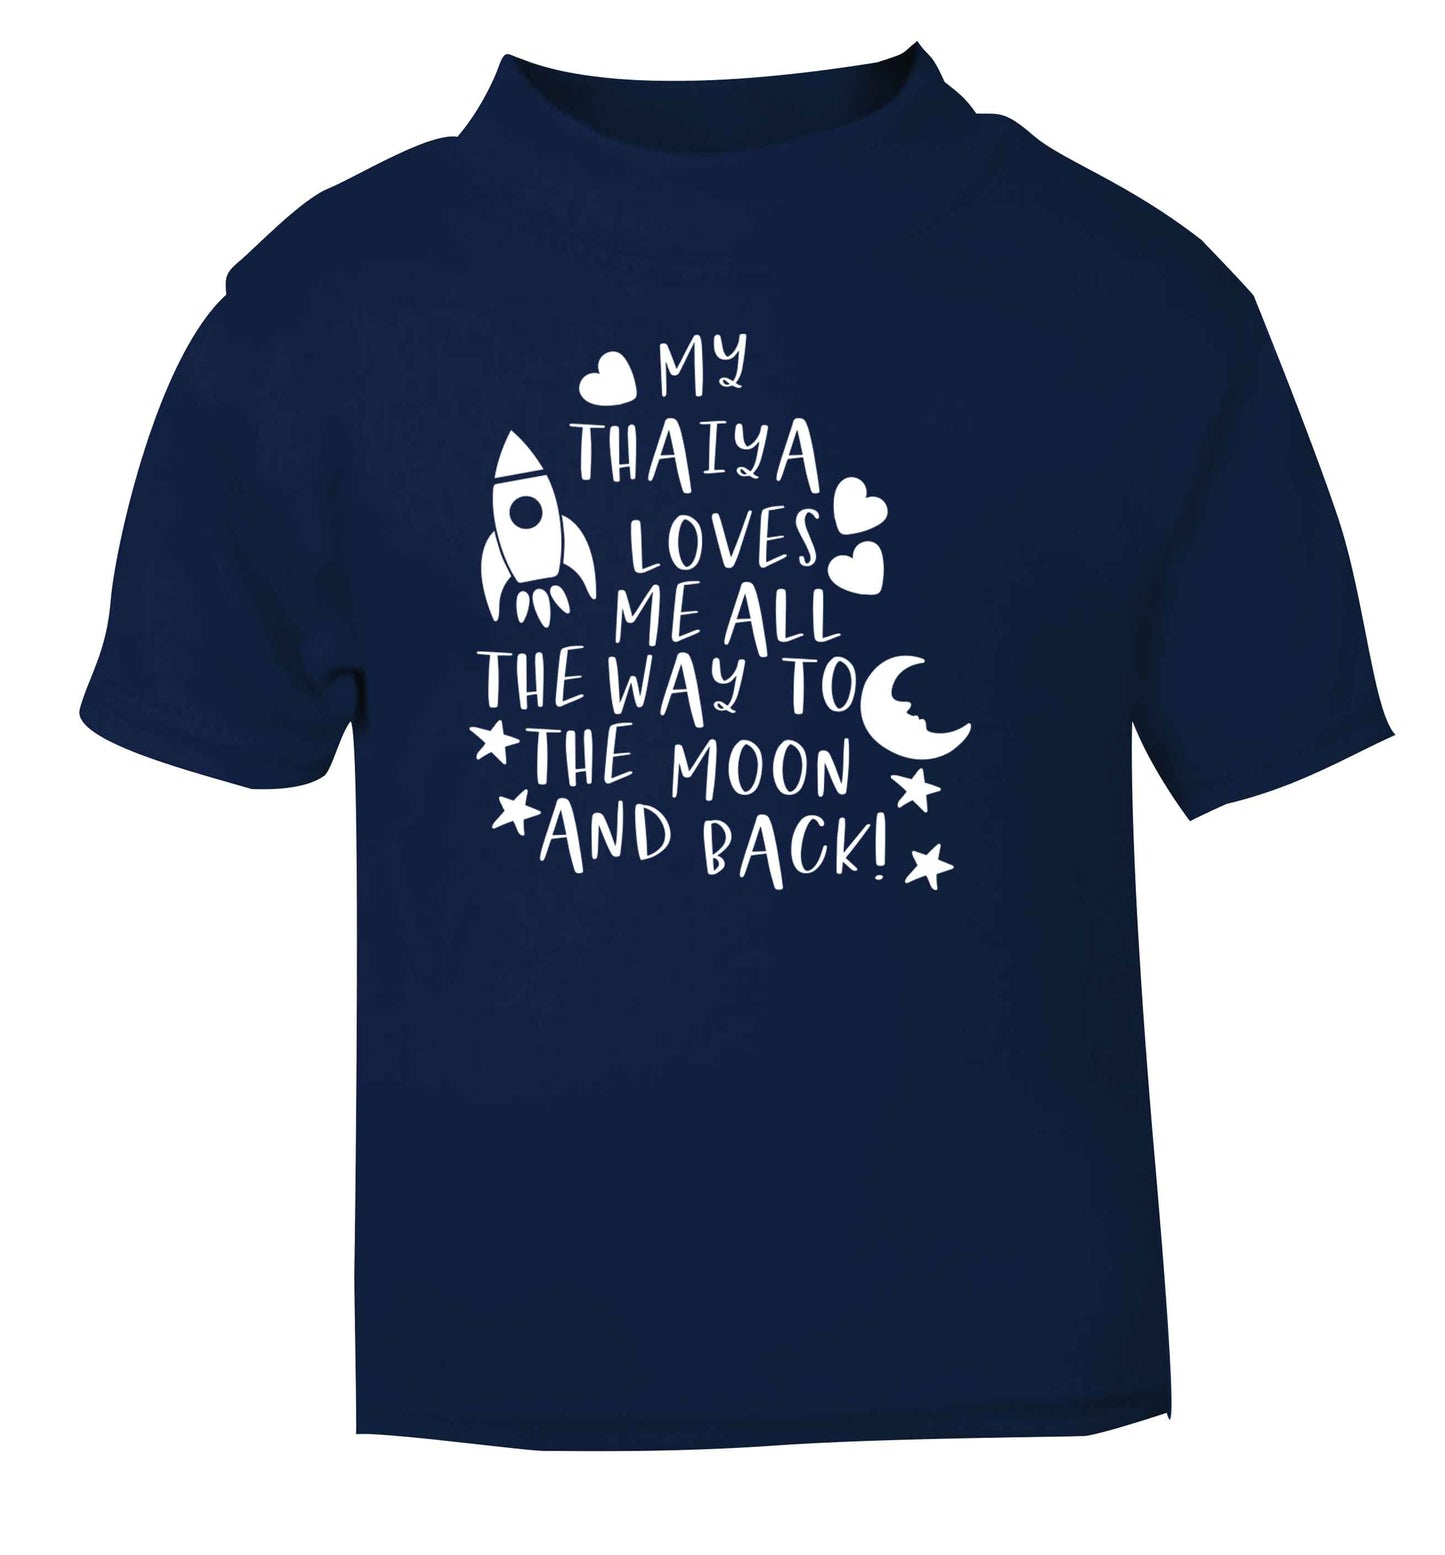 My thaiya loves me all the way to the moon and back navy Baby Toddler Tshirt 2 Years